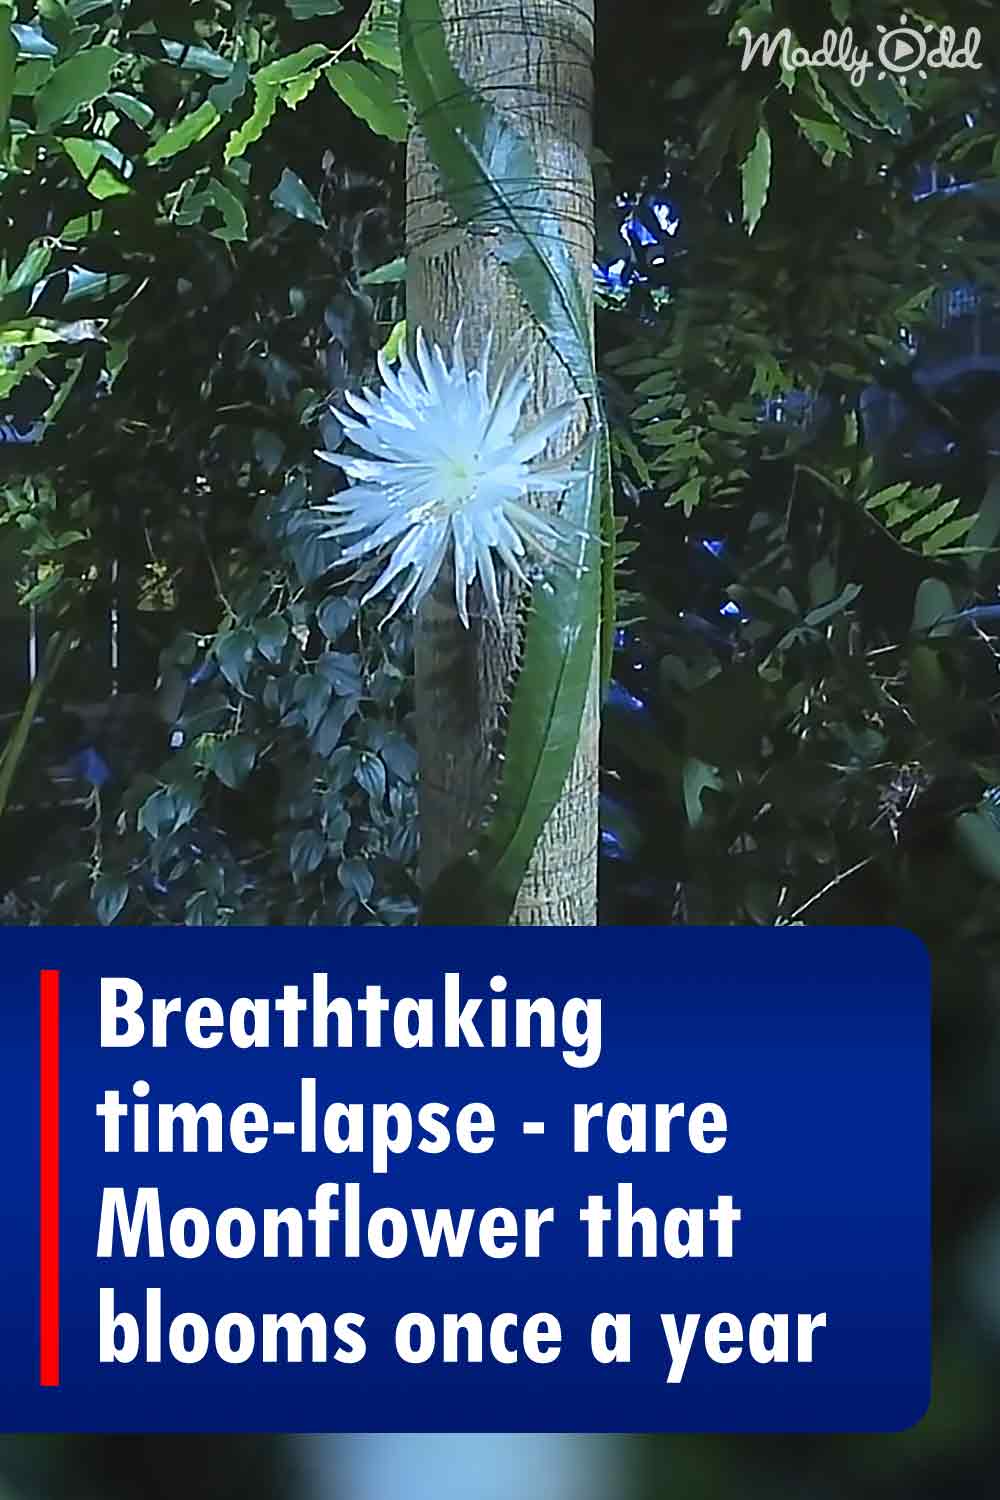 Breathtaking time-lapse - rare Moonflower that blooms once a year